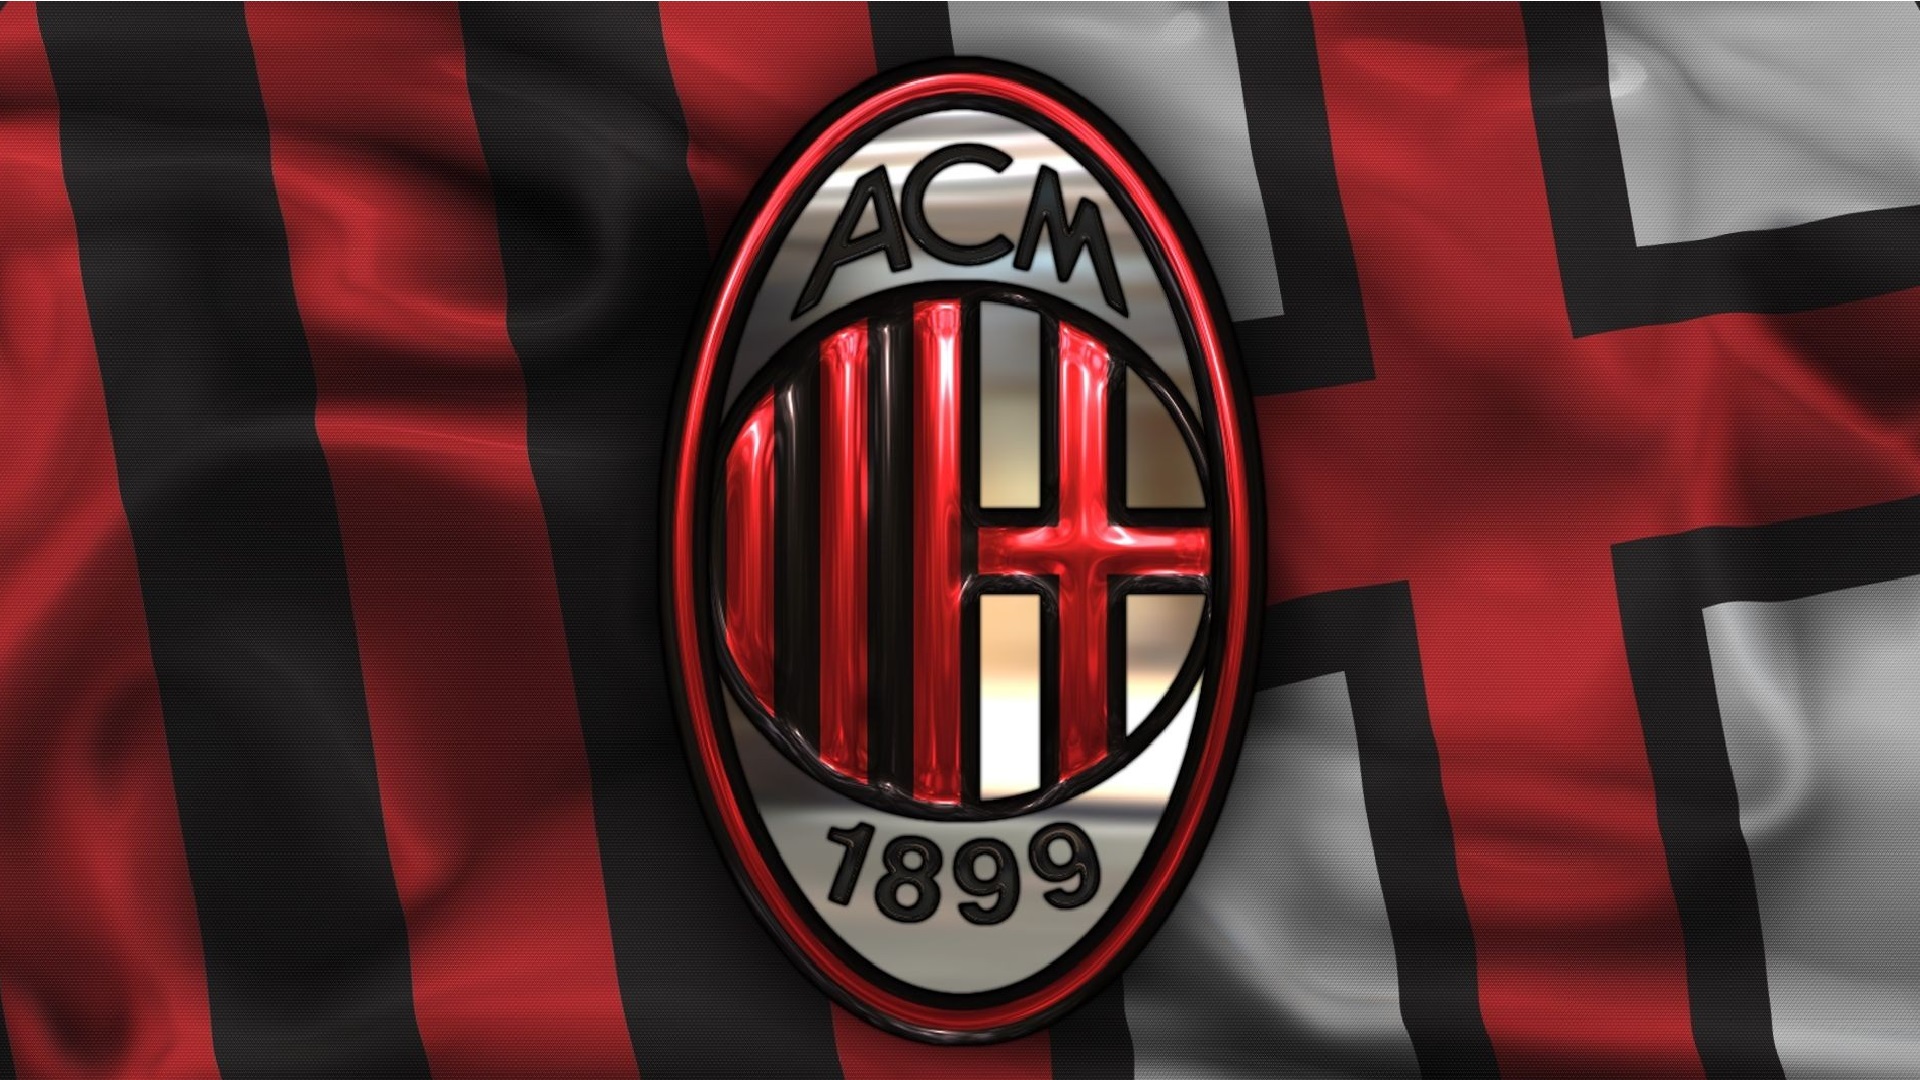 AC Milan Wallpaper HD with high-resolution 1920x1080 pixel. You can use this wallpaper for your Desktop Computers, Mac Screensavers, Windows Backgrounds, iPhone Wallpapers, Tablet or Android Lock screen and another Mobile device